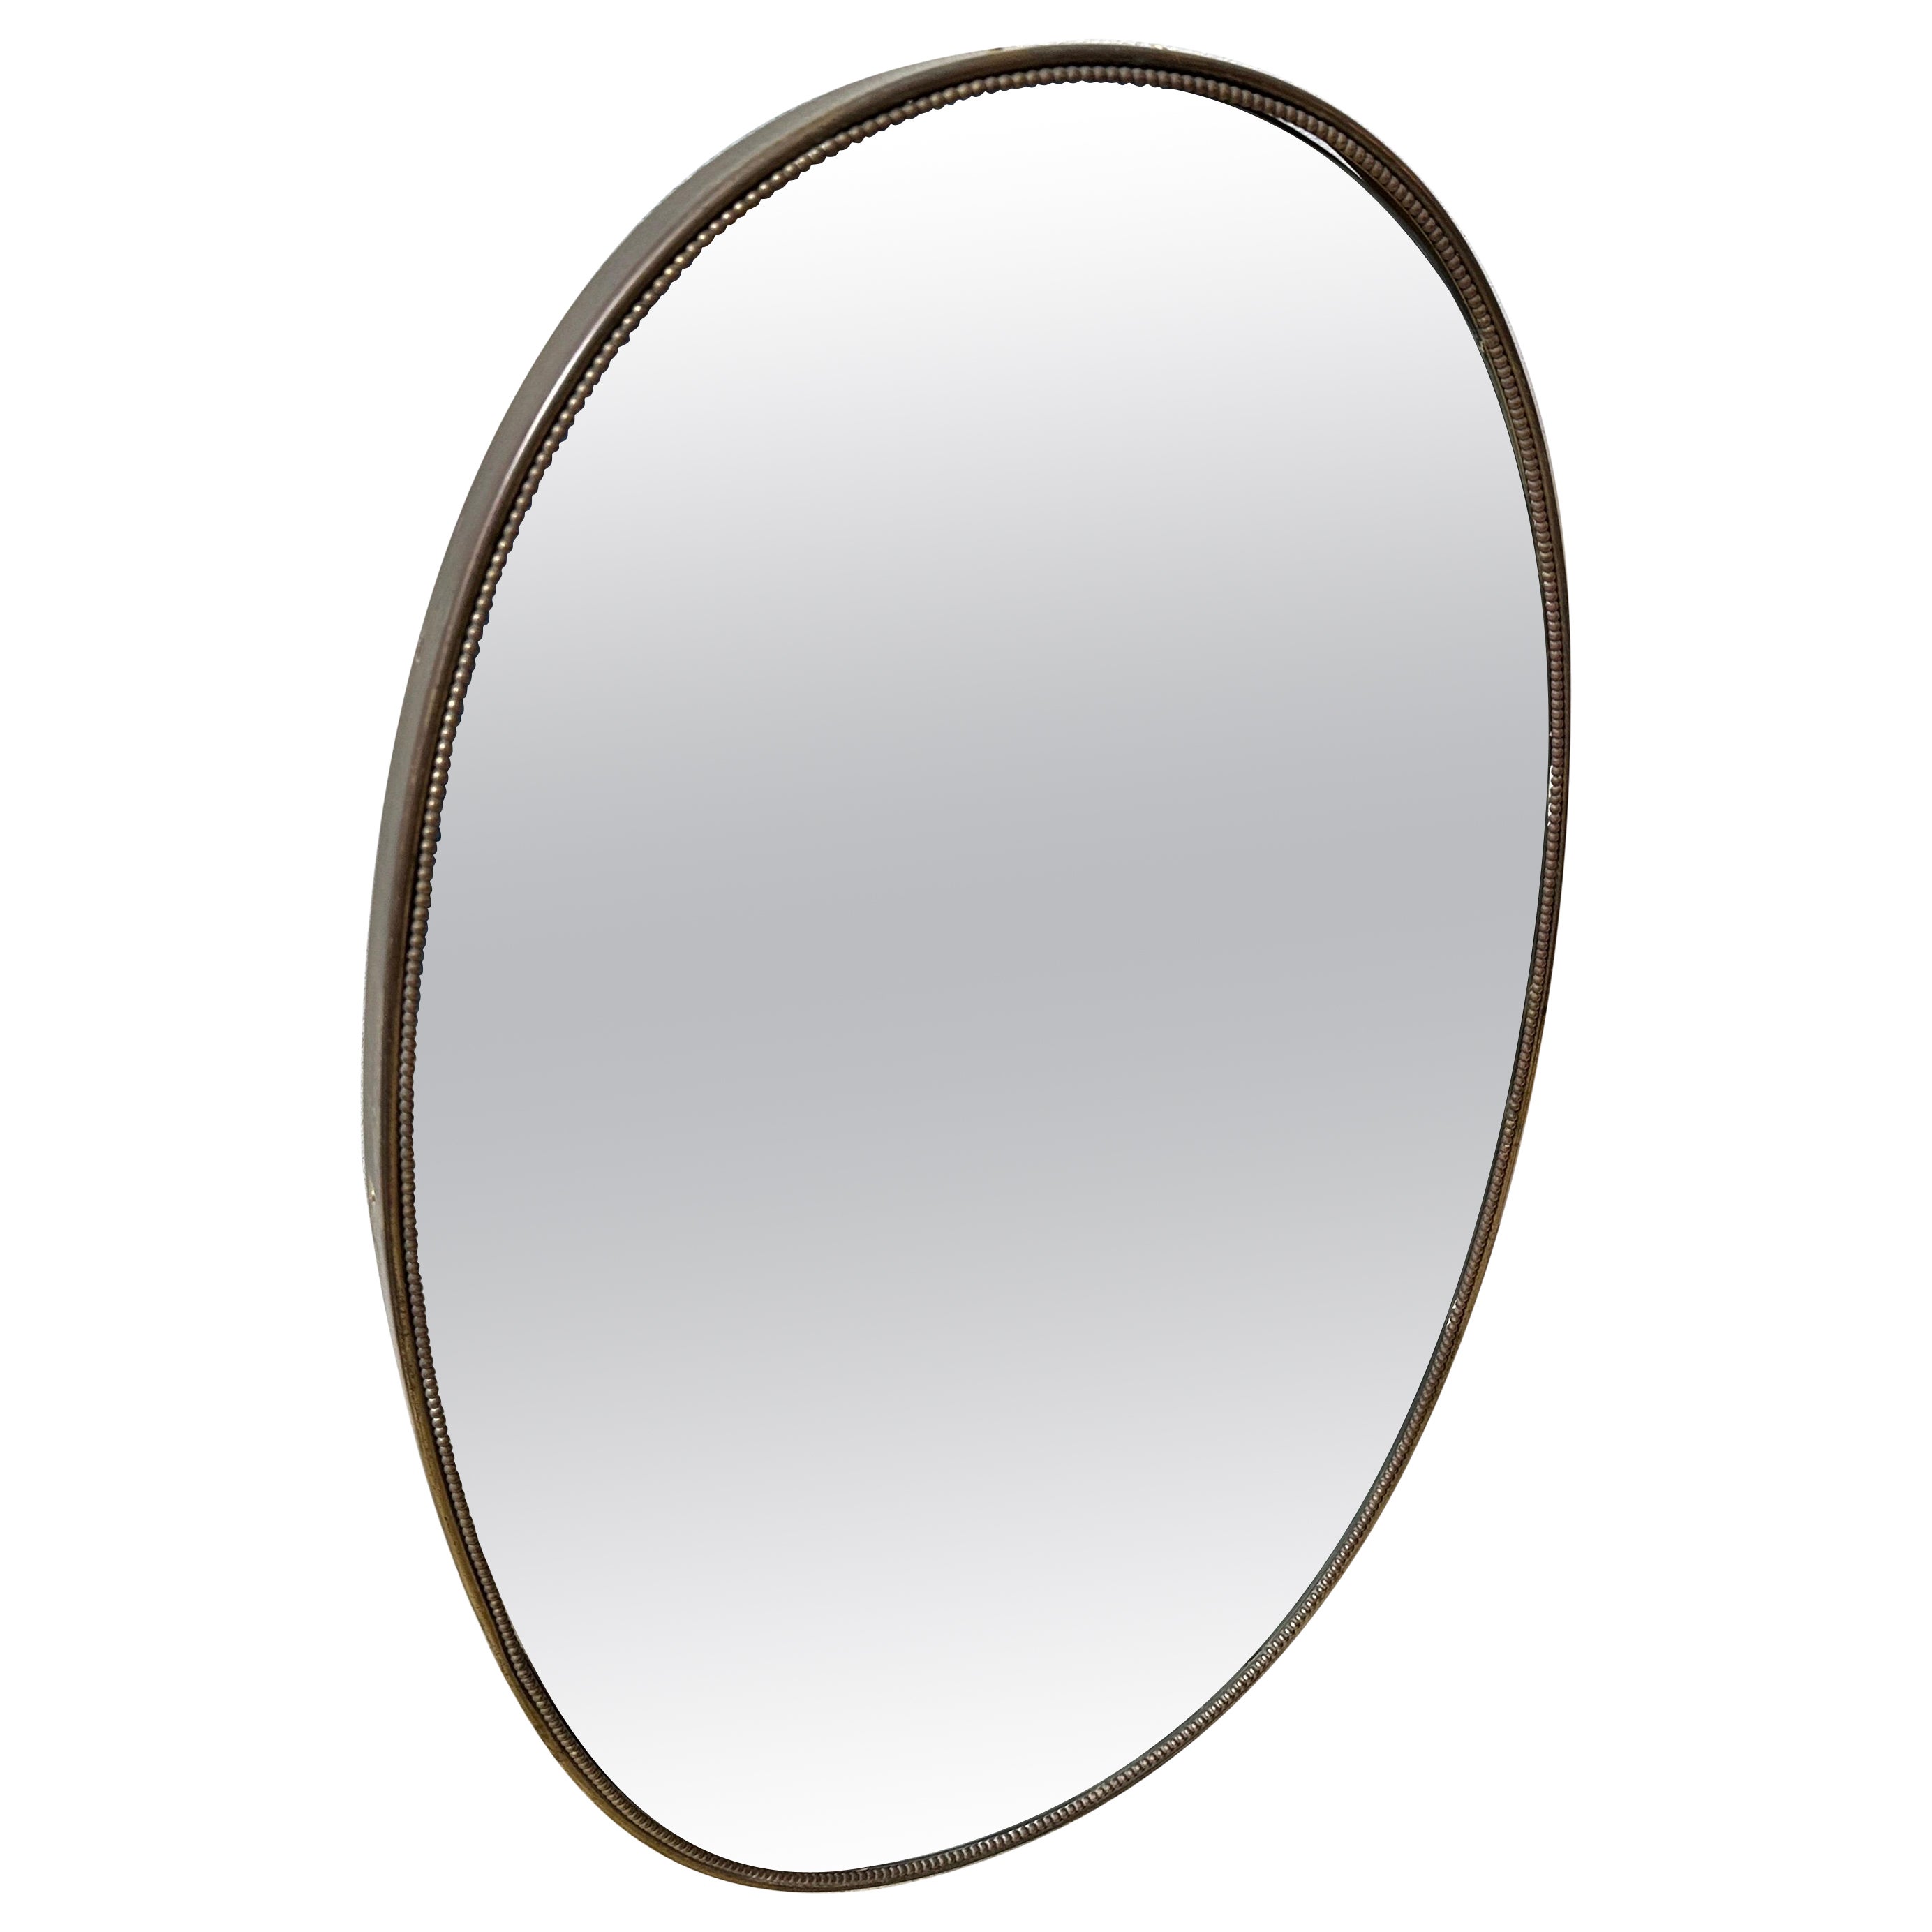 1960s Gio Ponti Style Mid-Century Modern Brass Oval Wall Mirror For Sale